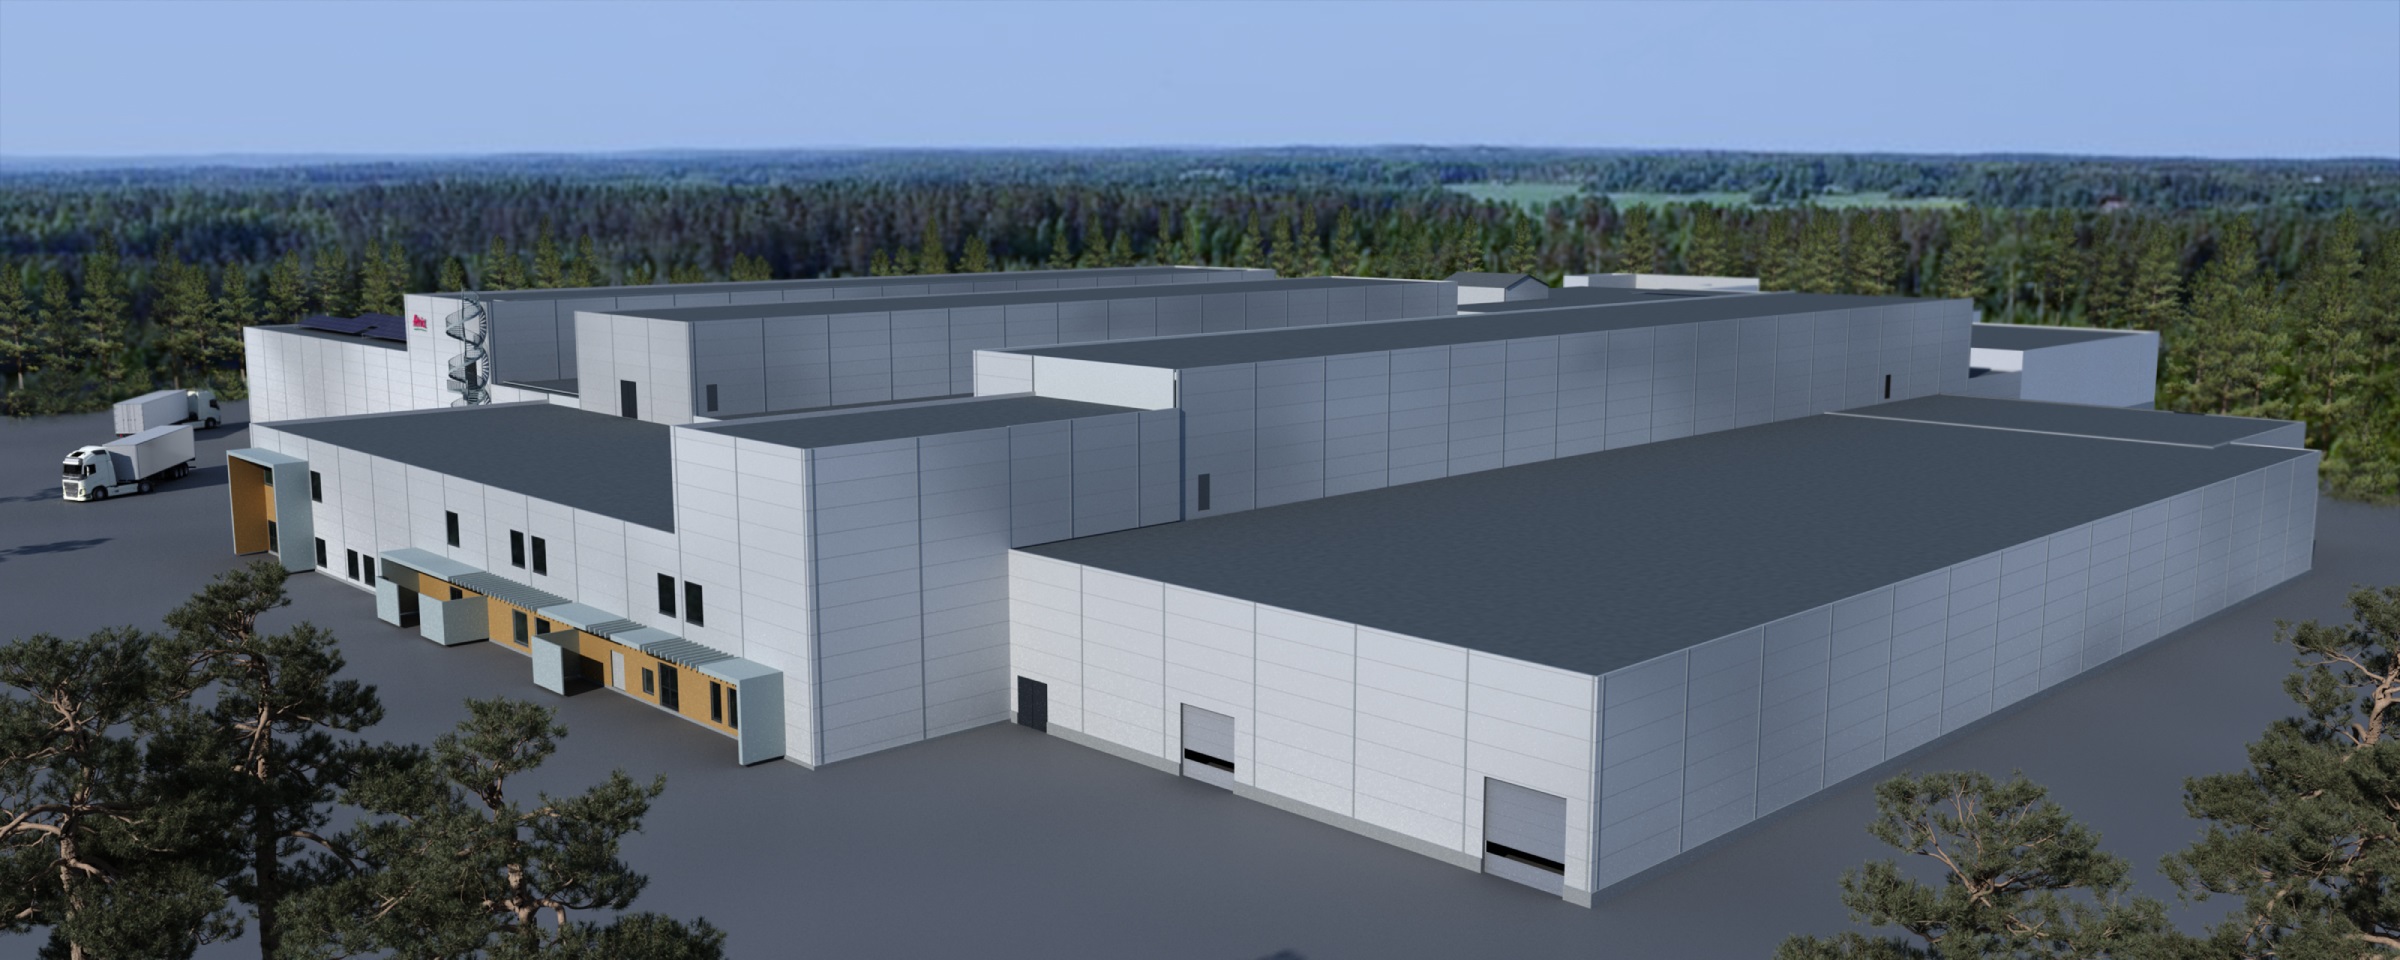 A 15,000 bph greenfield for Atria Finland